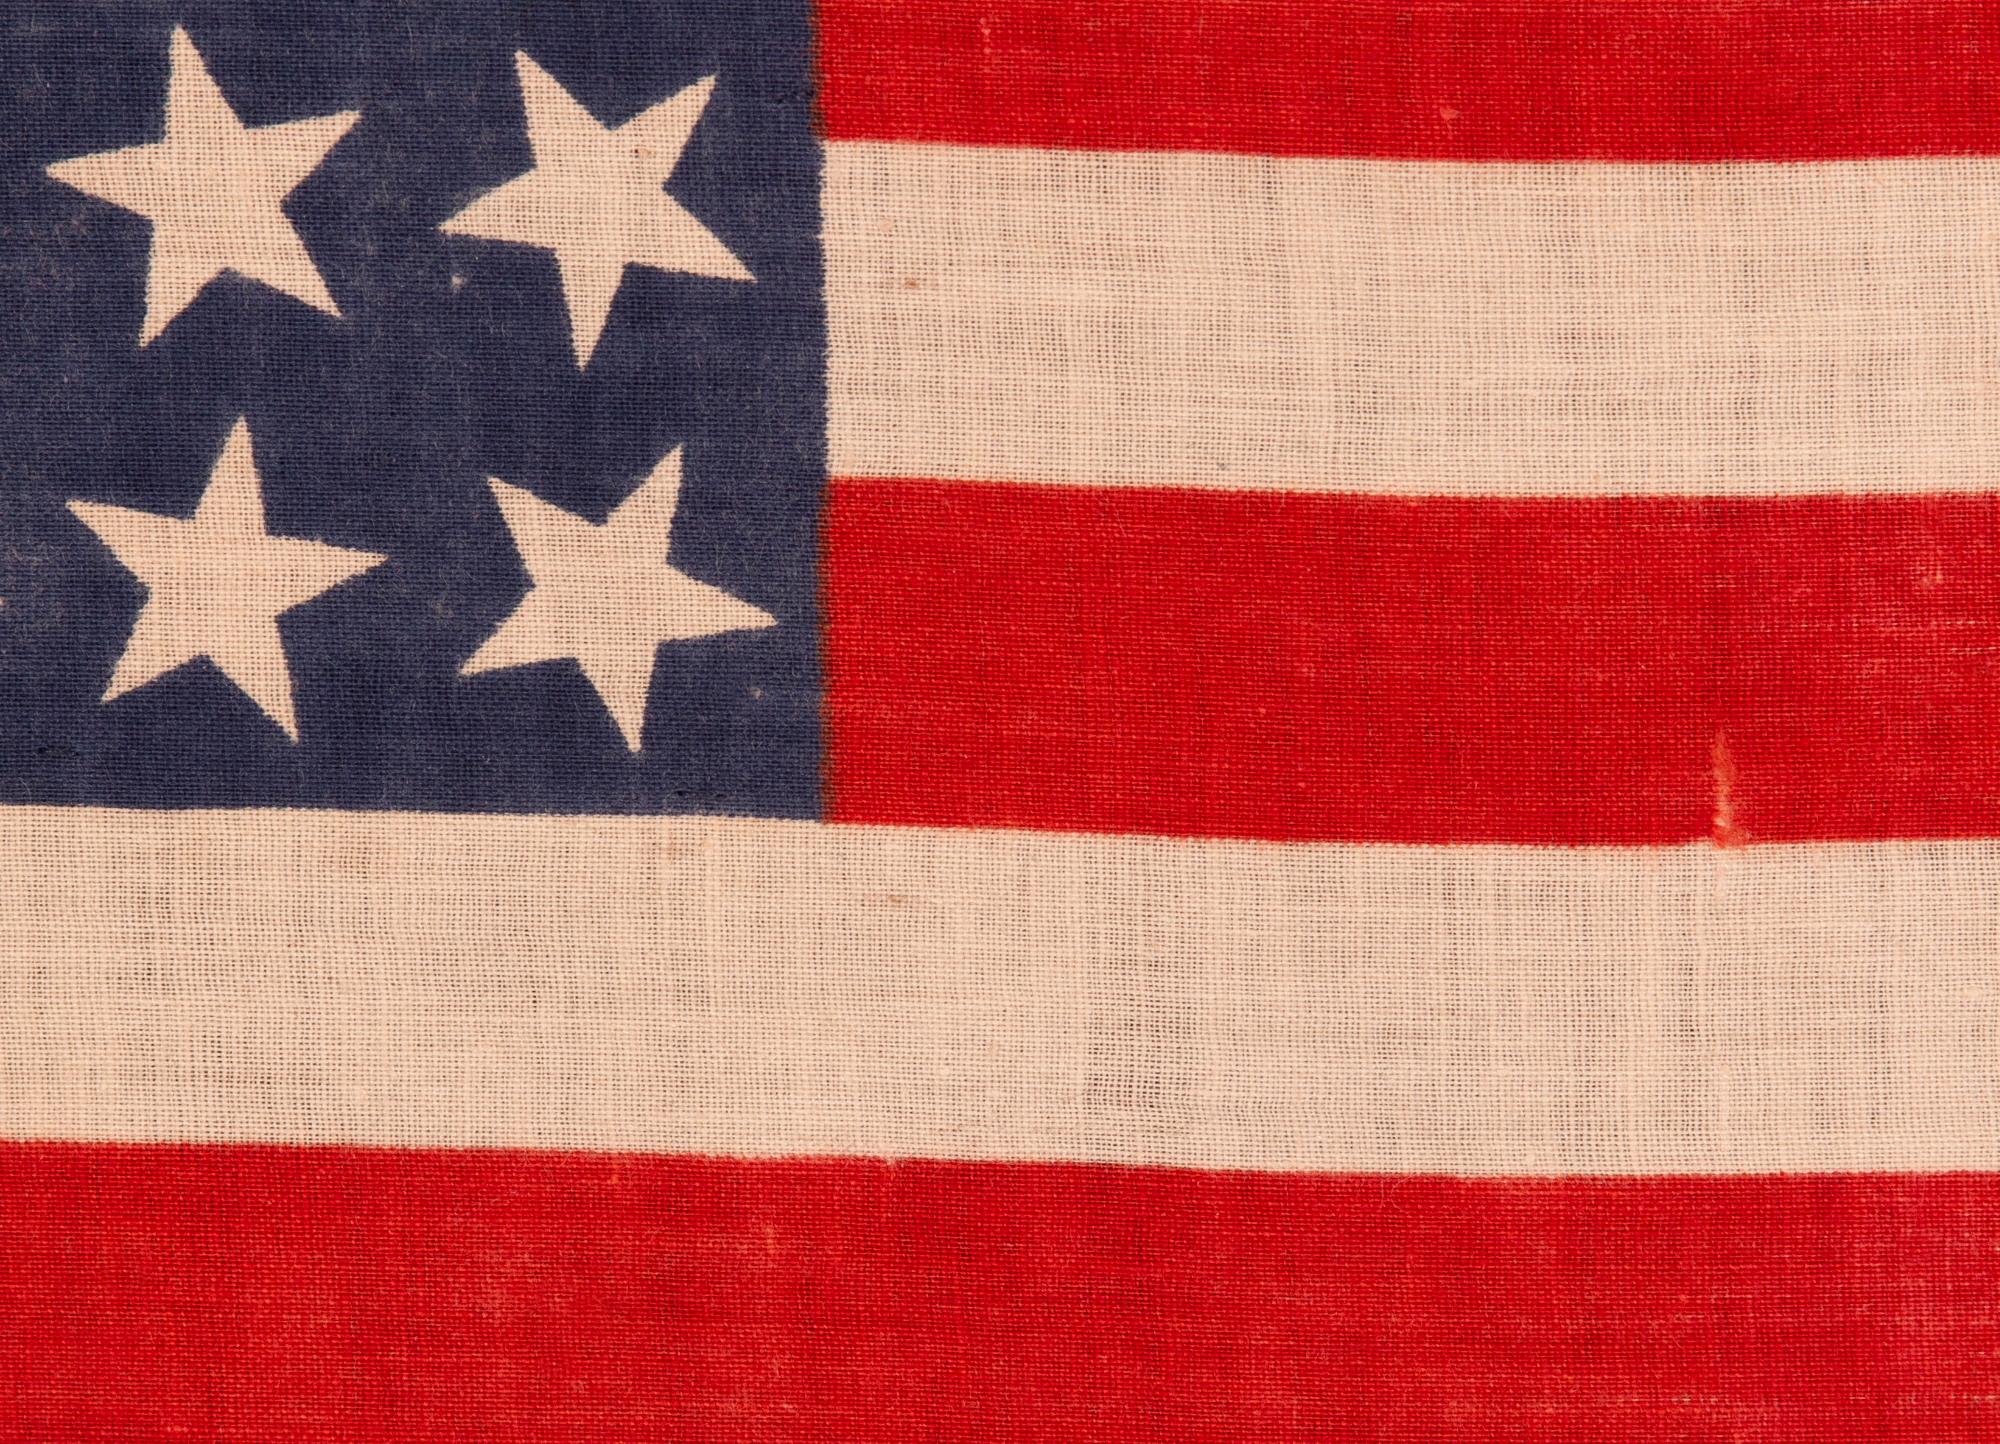 42 Star Antique American Parade Flag, Ca 1889-1890 In Good Condition For Sale In York County, PA